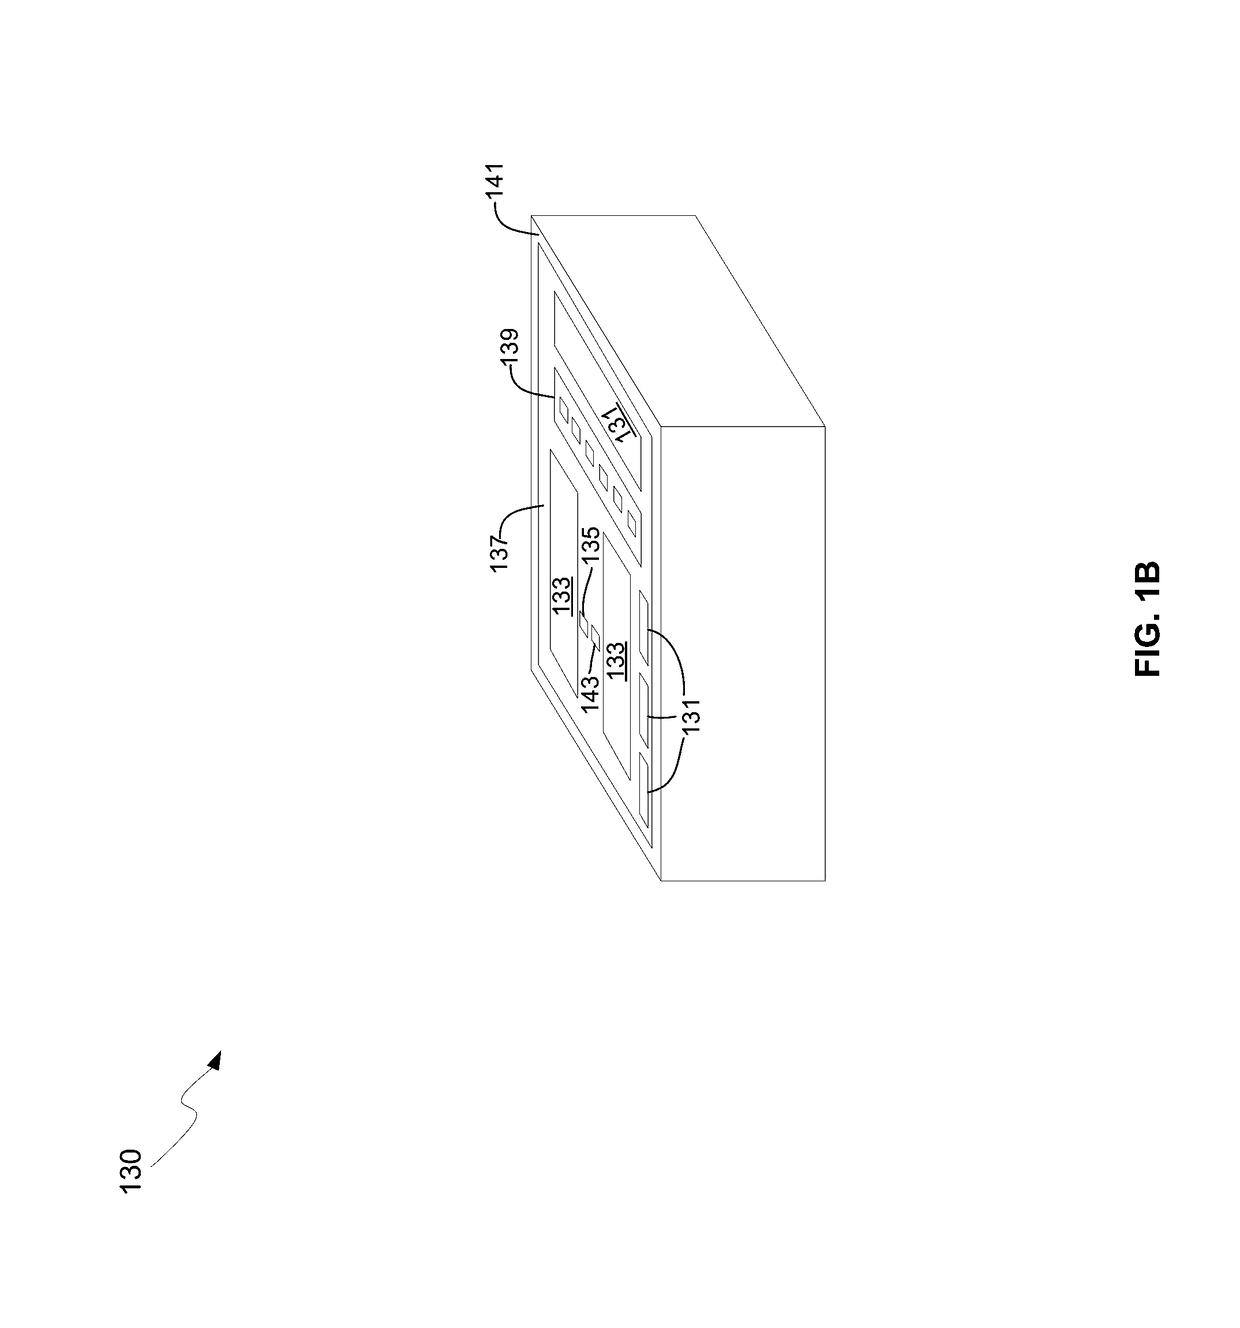 Method And System For Partial Integration Of Wavelength Division Multiplexing And Bi-Directional Solutions